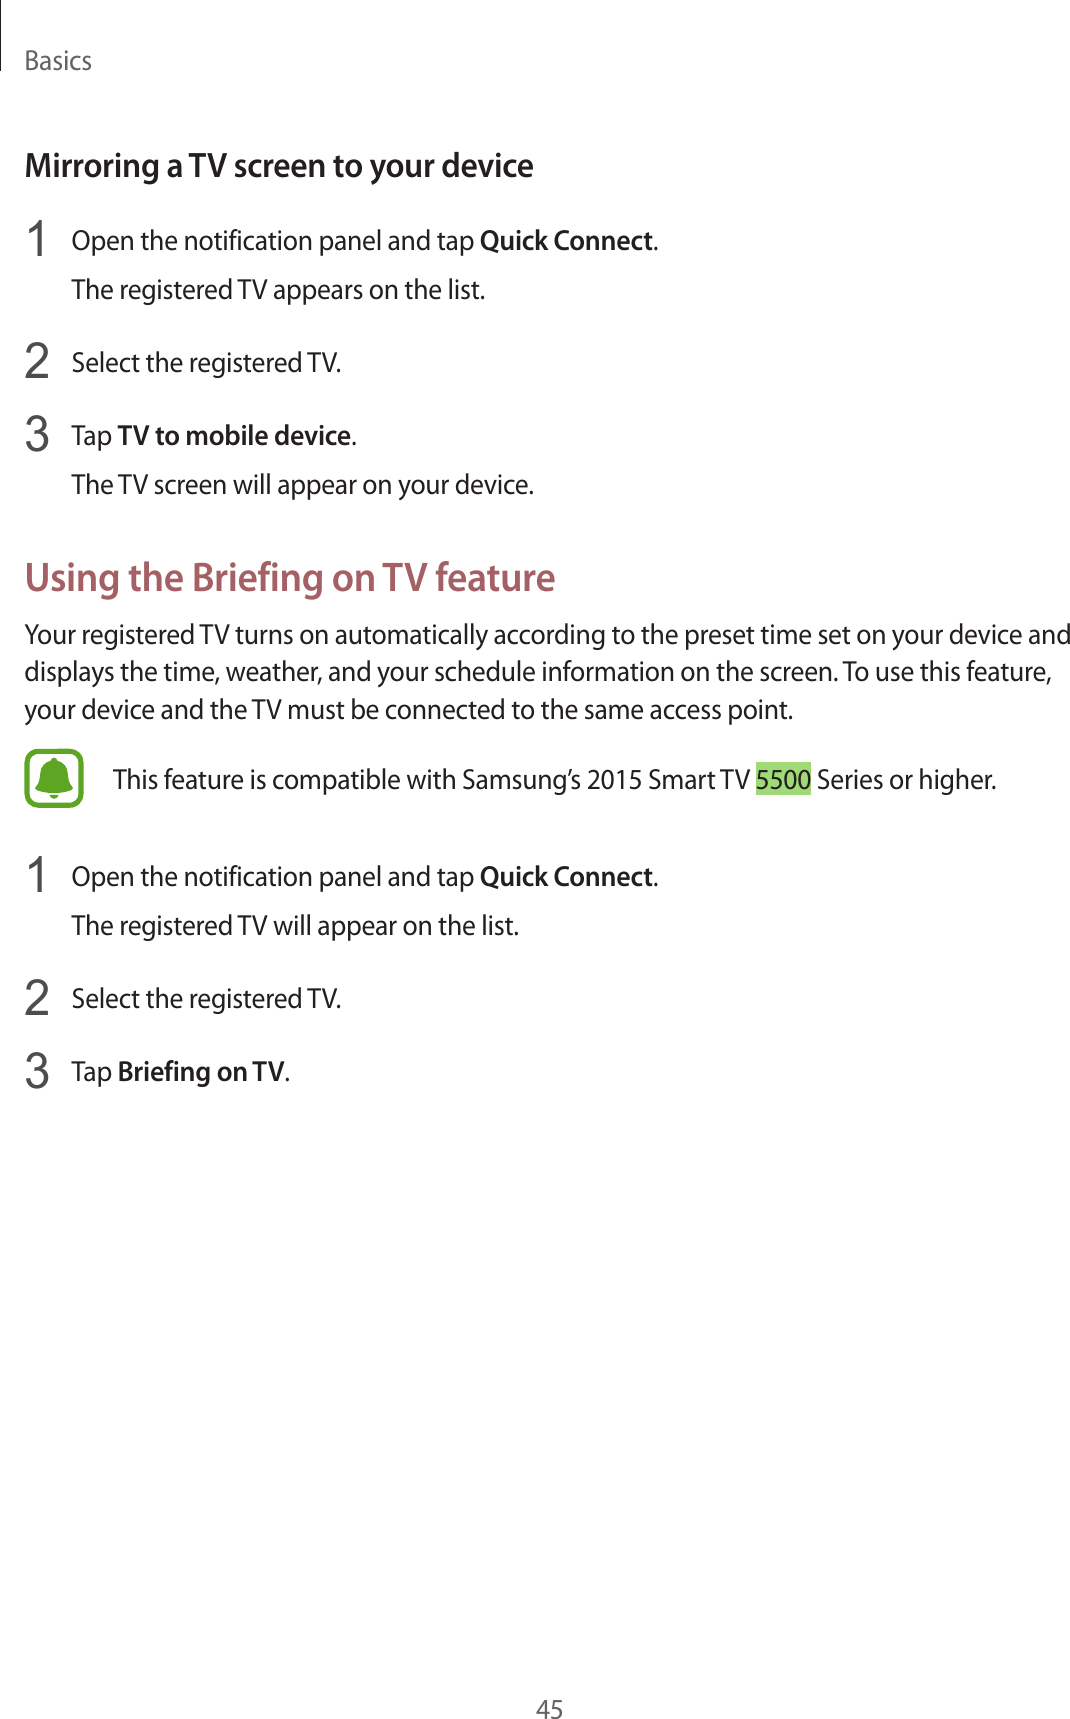 Basics45Mirroring a TV screen to y our devic e1  Open the notification panel and tap Quick Connect.The reg ist er ed TV appears on the list.2  Select the reg ister ed TV.3  Tap TV to mobile device.The TV screen will appear on your devic e .Using the Briefing on TV fea tur eYour register ed TV turns on automatically accor ding t o the pr eset time set on y our device and displays the time , w ea ther, and your schedule information on the scr een. To use this feature , your device and the TV must be connected to the same access point.This f eatur e is c ompatible with Samsung’s 2015 Smart TV 5500 Series or higher.1  Open the notification panel and tap Quick Connect.The reg ist er ed TV will appear on the list.2  Select the reg ister ed TV.3  Tap Briefing on TV.